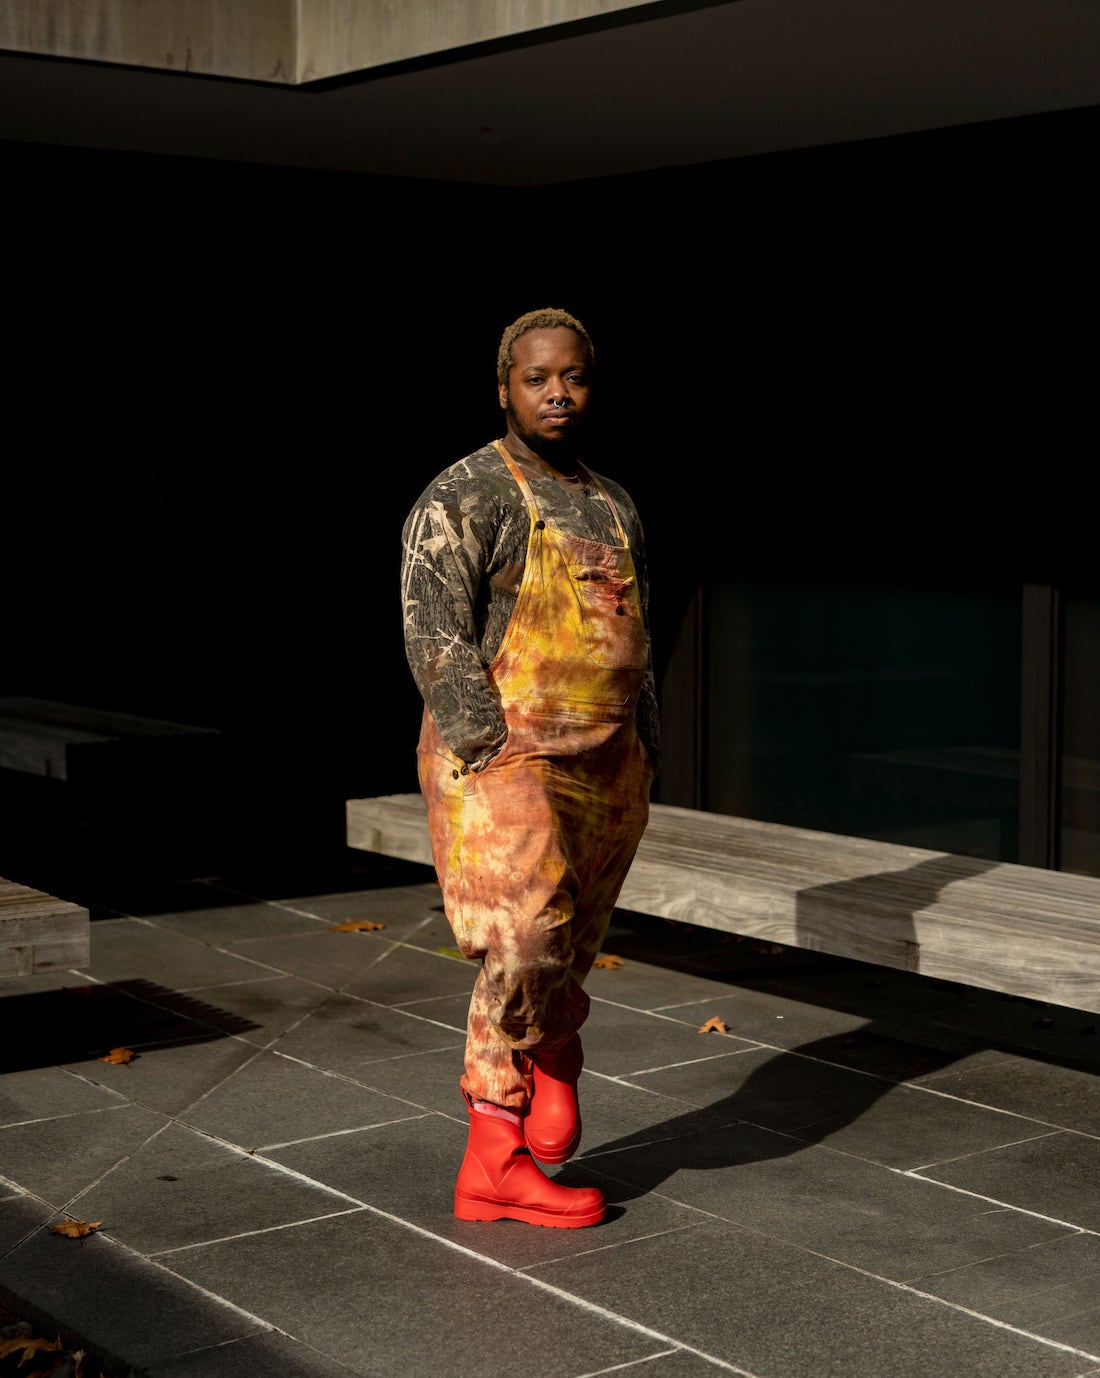 A Black man stands at the center of a space with black walls and a gray stone tile floor. He has a short, blonde-dyed Afro and is wearing a paint-covered sweatshirt and overalls with new red ankle boots. He's turned slightly away from the camera but looks directly at the viewer.